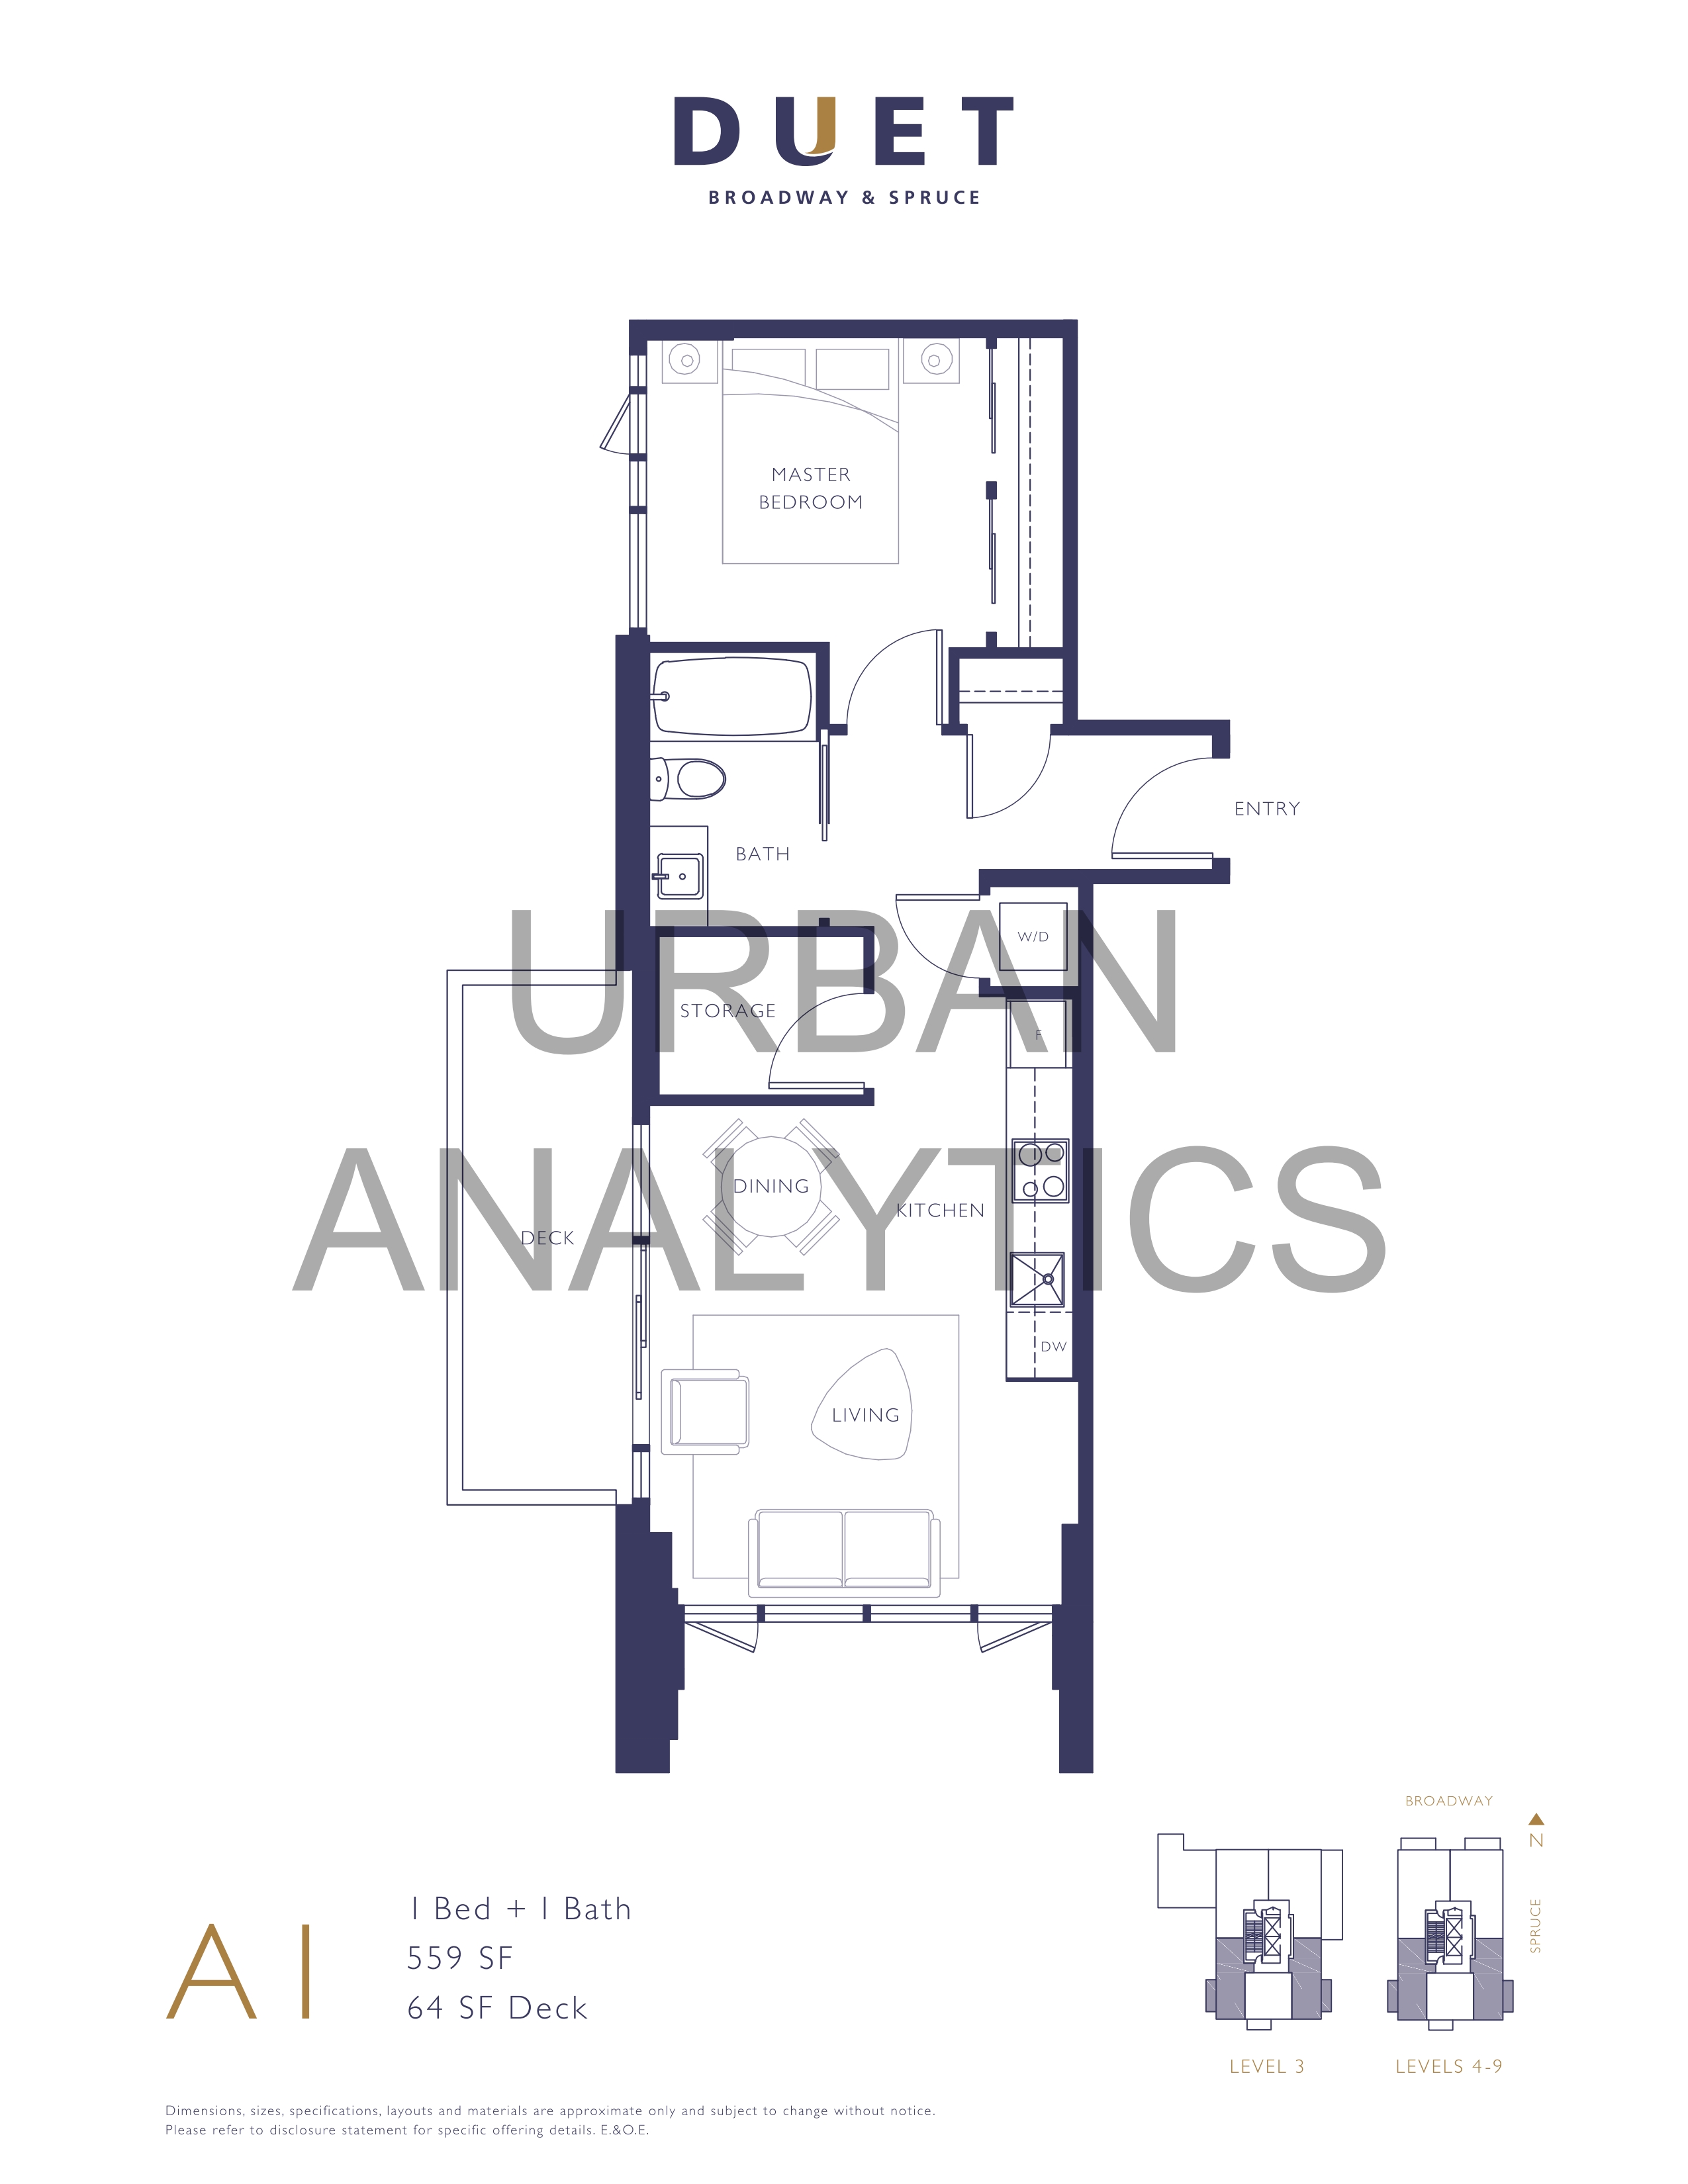 603 Floor Plan of Duet Condos with undefined beds